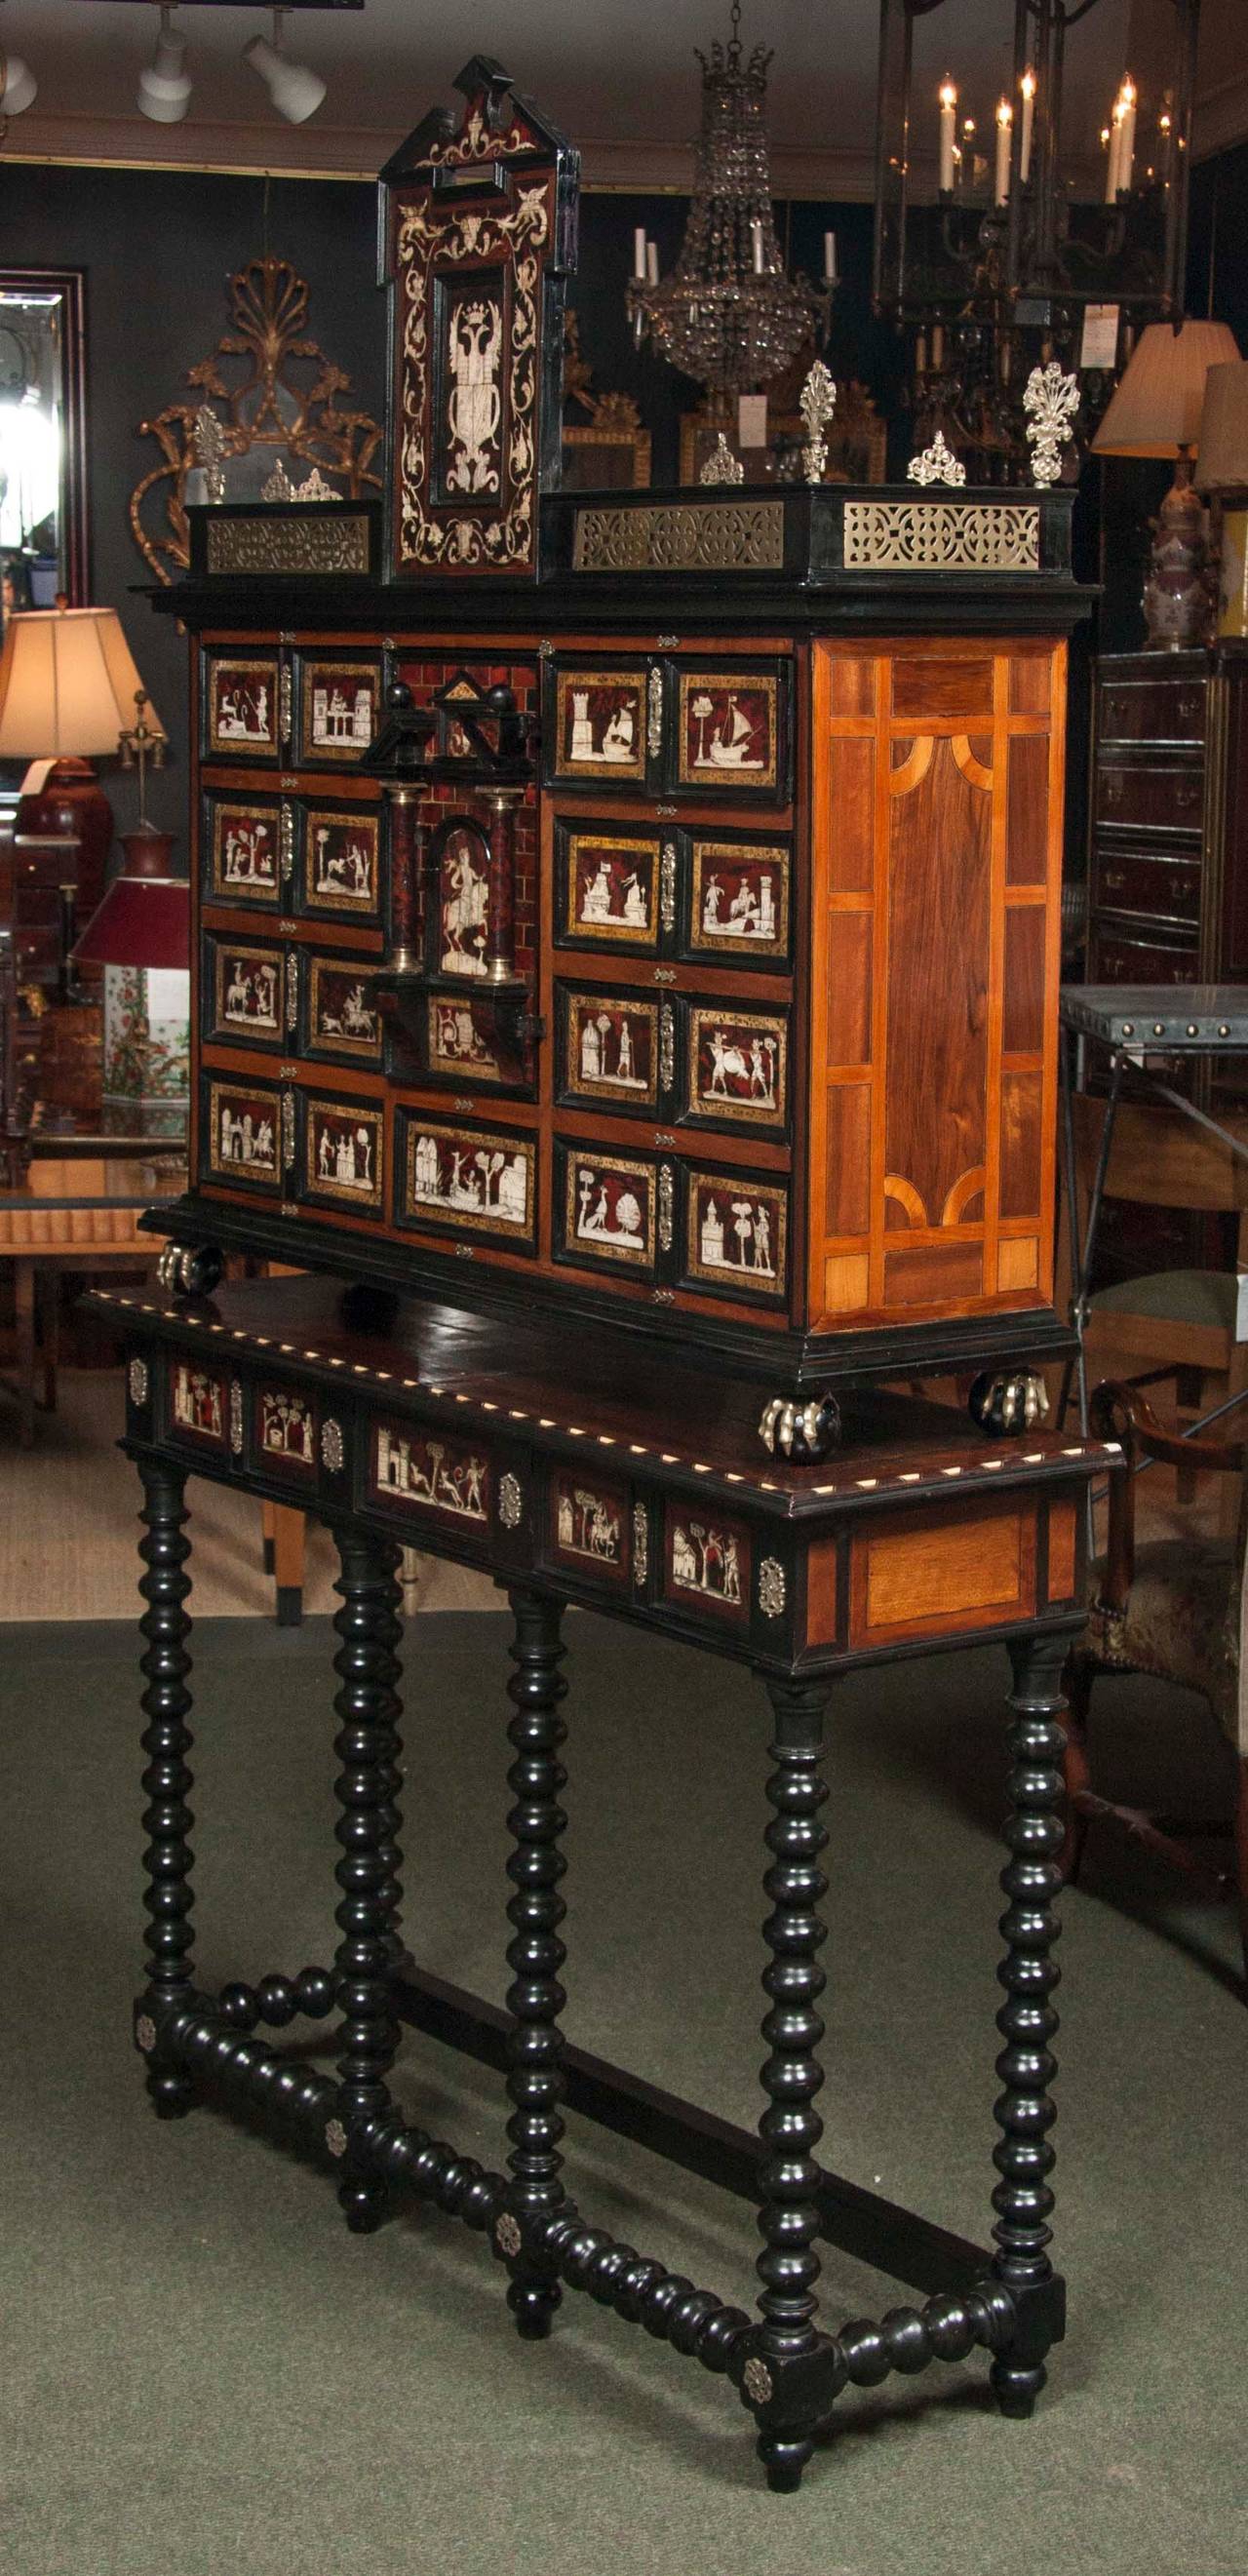 A Spanish tortoiseshell and bone inlaid, ebonized walnut marquetry cabinet on stand.  The upper section with a pediment with a double headed eagle surmounted by a crown and family crest.  A center door, bordered by columns, reveals four interior